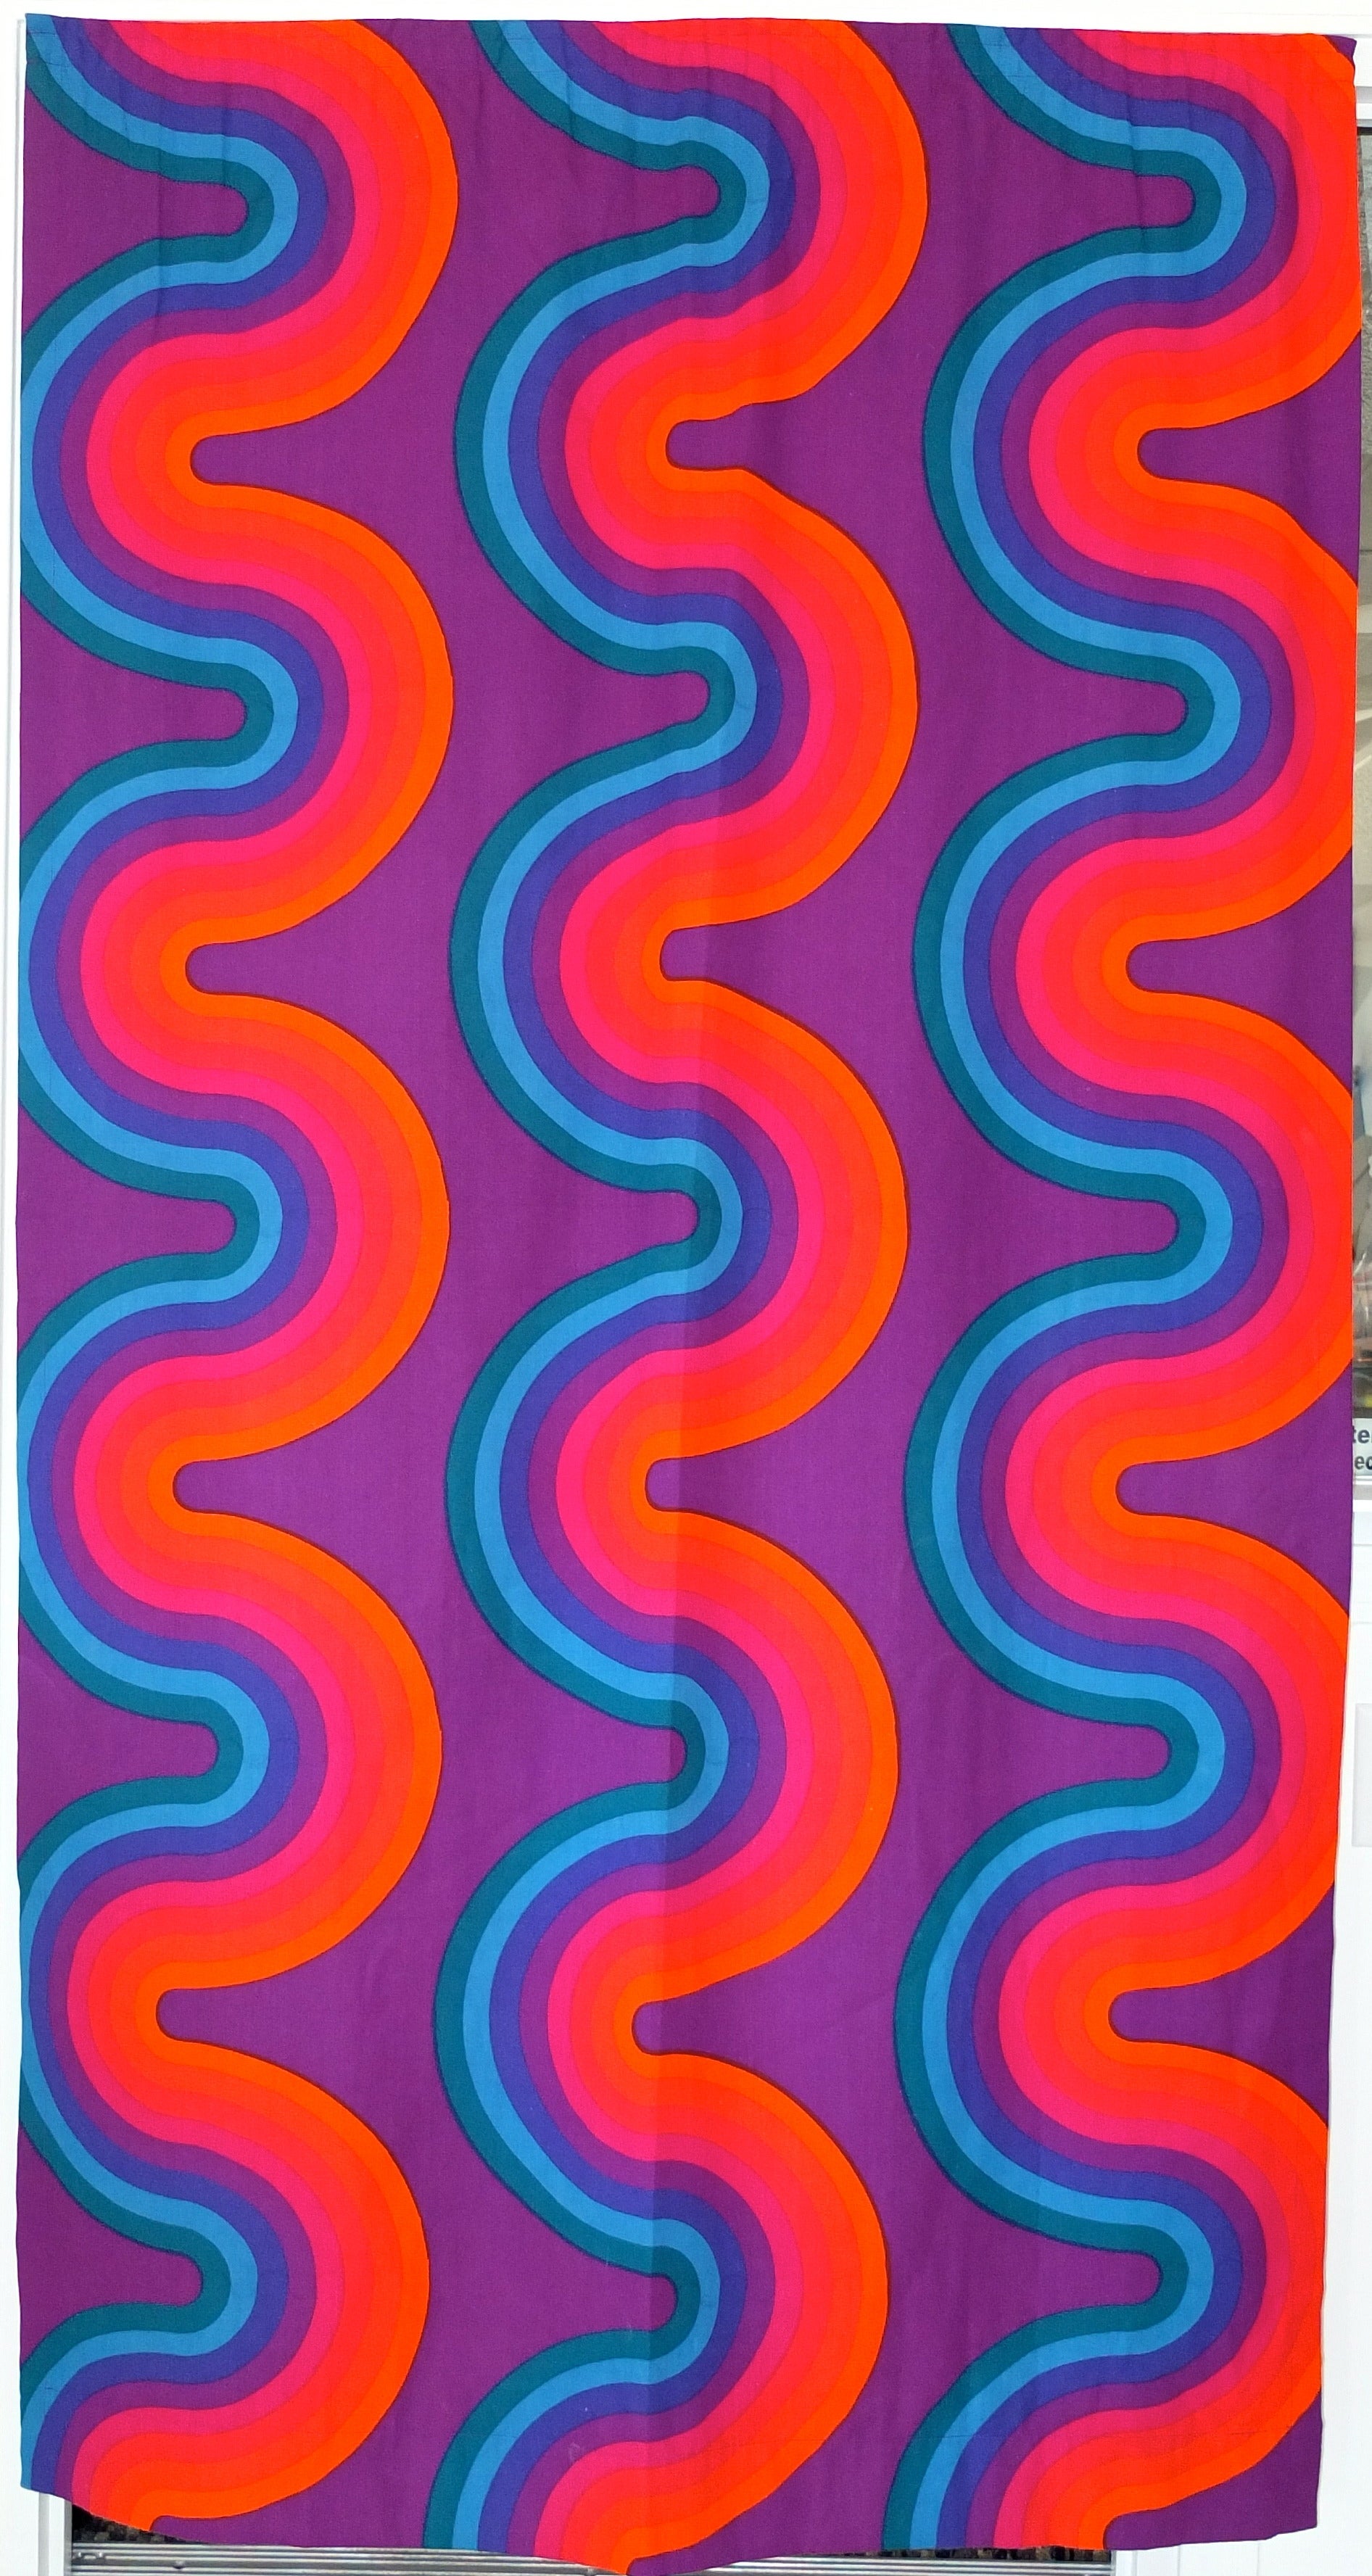 Presented here is a pair of original vintage curtain panels designed by Verner Panton for Mira-X.  Both curtains are 80 inches long by 44 inches wide.  Panton had these curtains specially made as a gift for a friend of his in Denmark. They're made